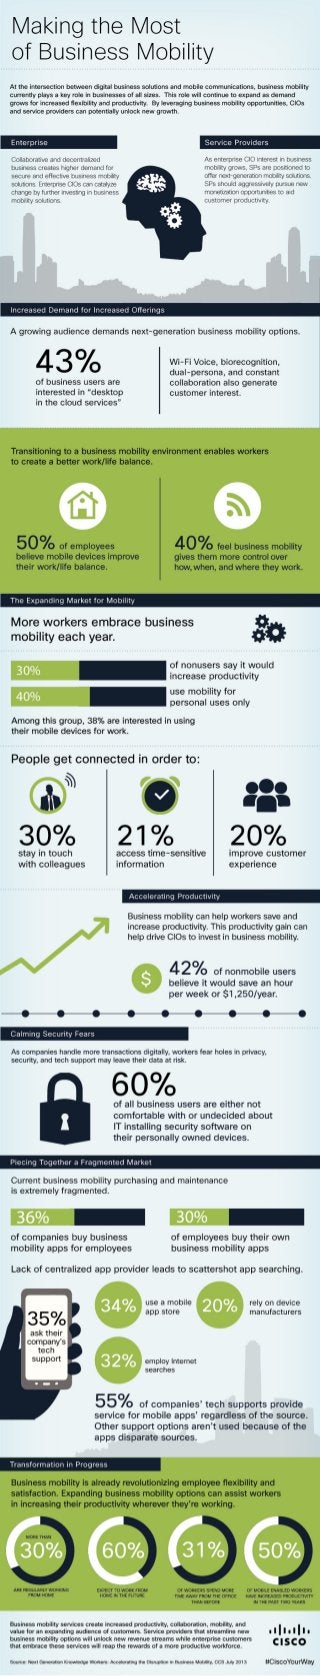 Business Mobility Infographic | Voyager Networks